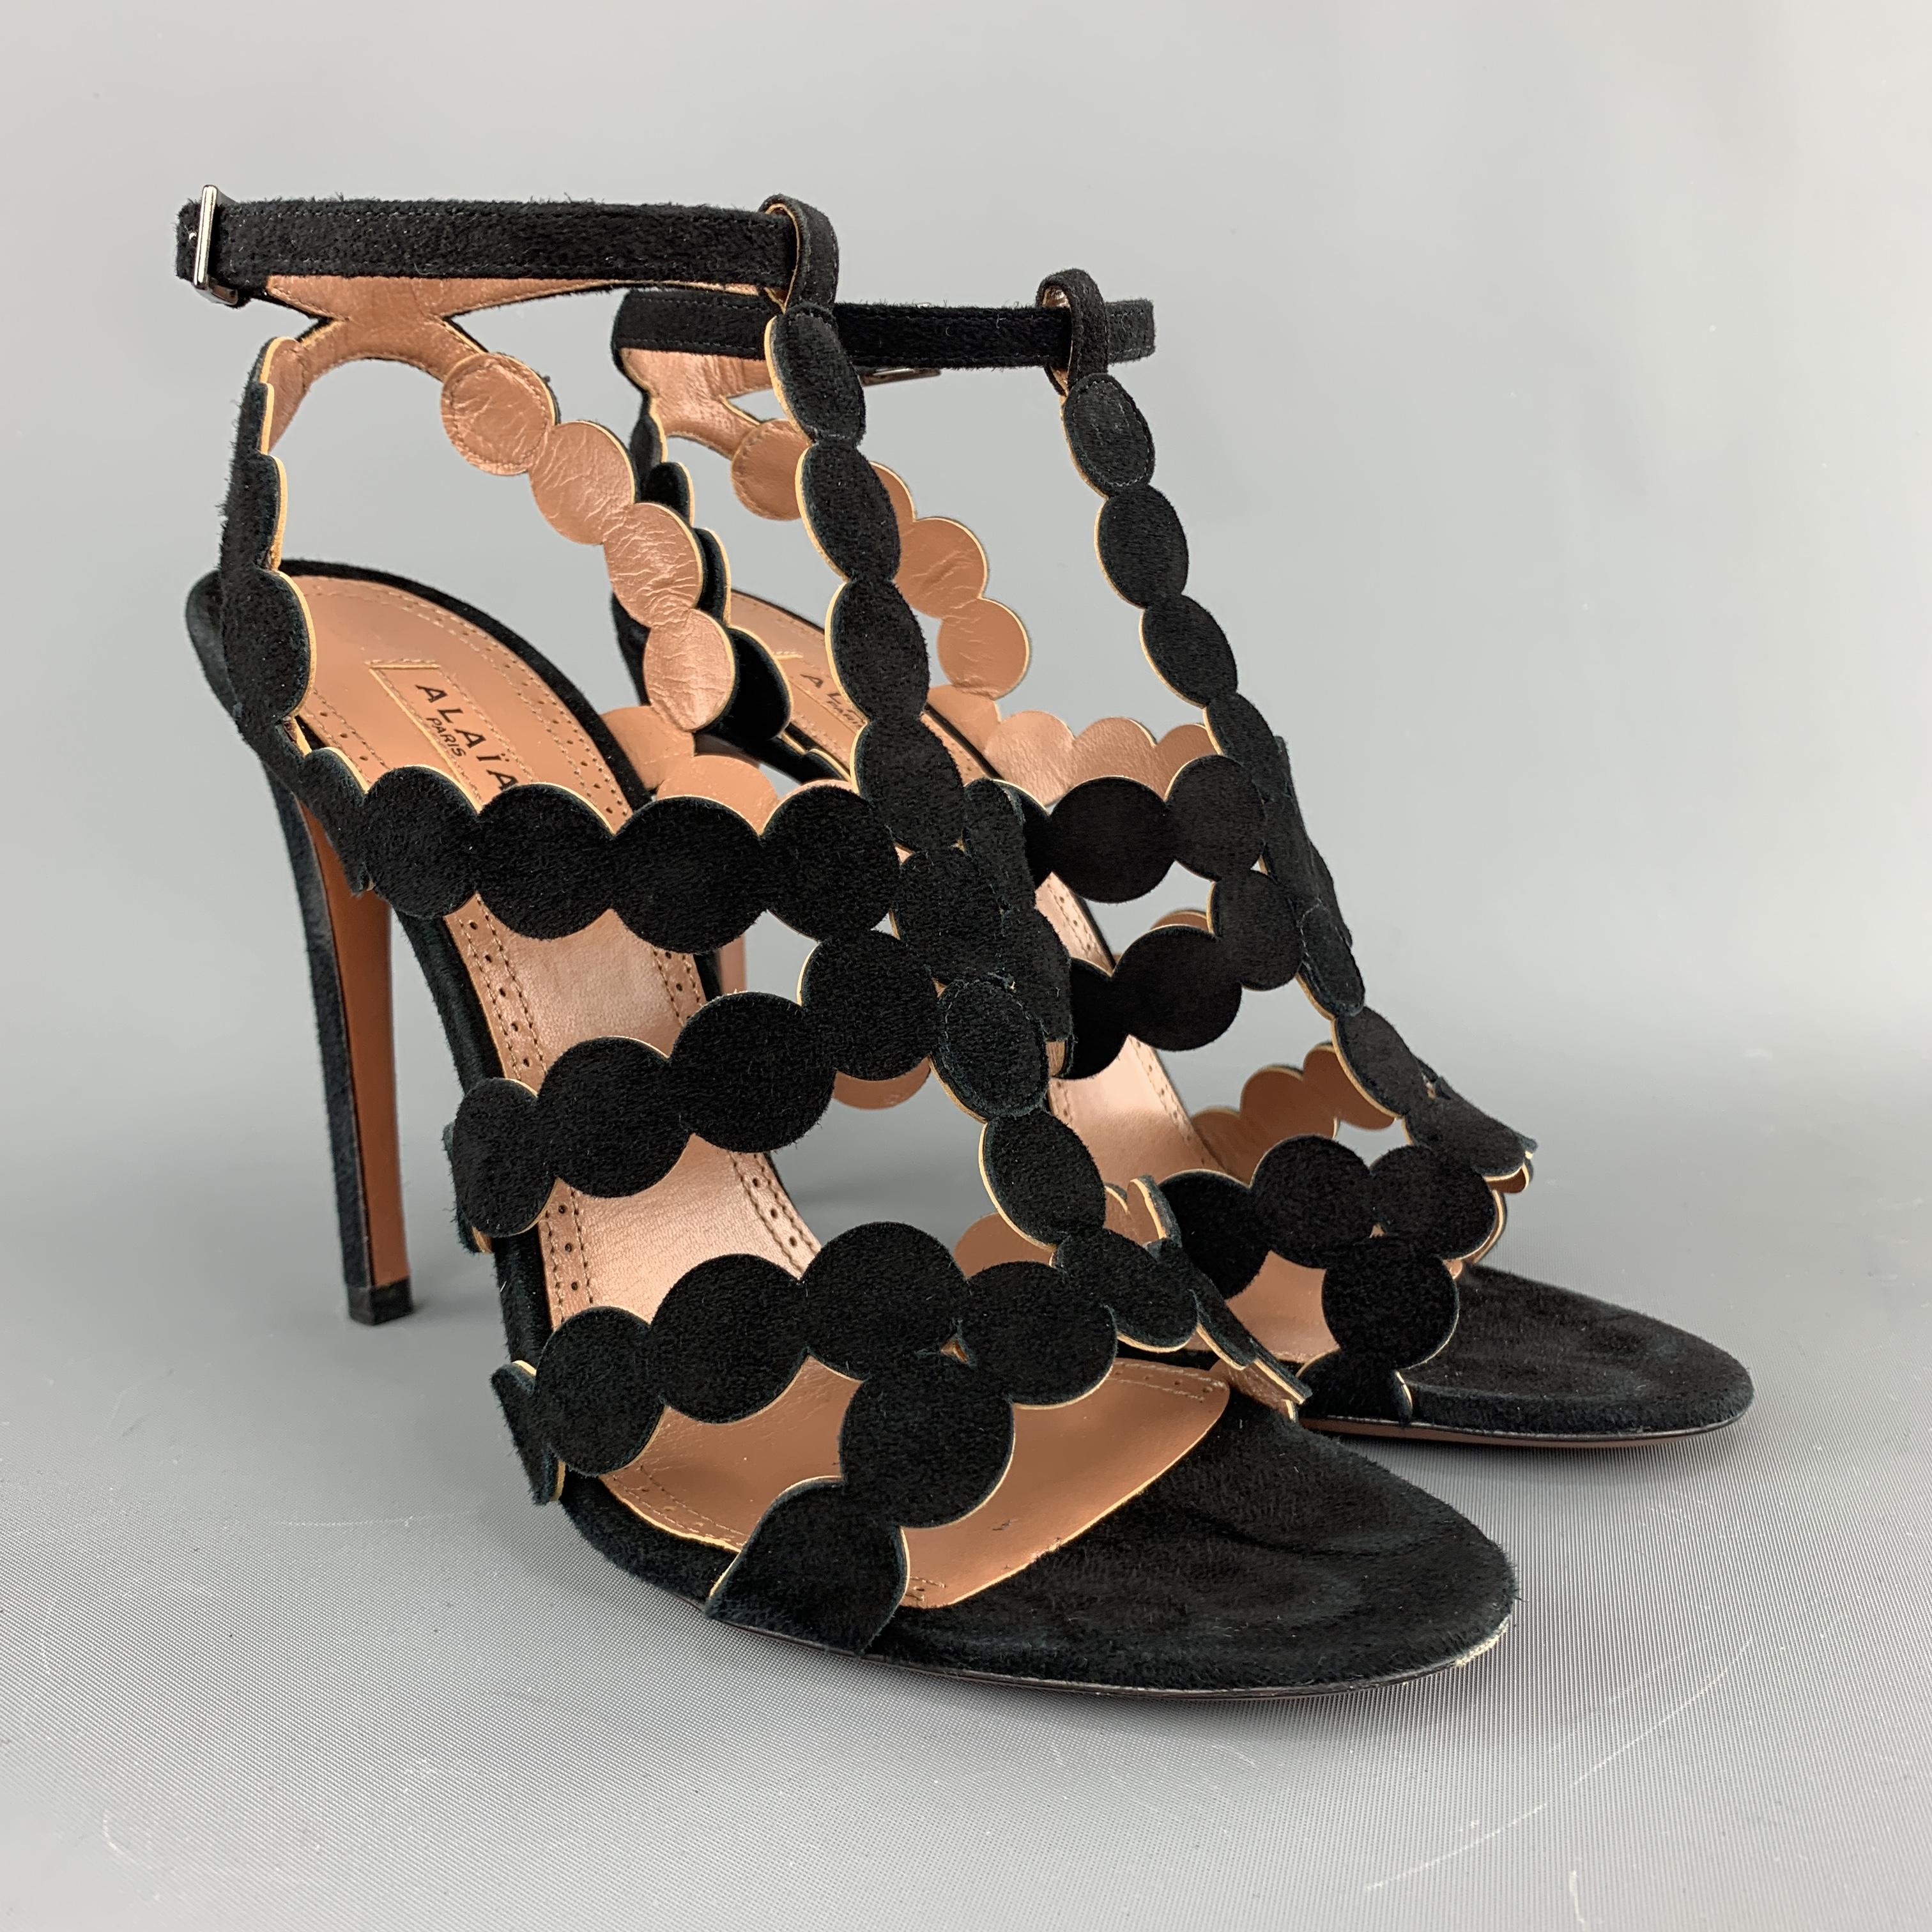 ALAIA sandals come in black suede with laser cut round straps, ankle strap, and T strap front. Made in Italy.

Excellent Pre-Owned Condition.
Marked: 38

Measurements:

Heel: 4.75 in. 